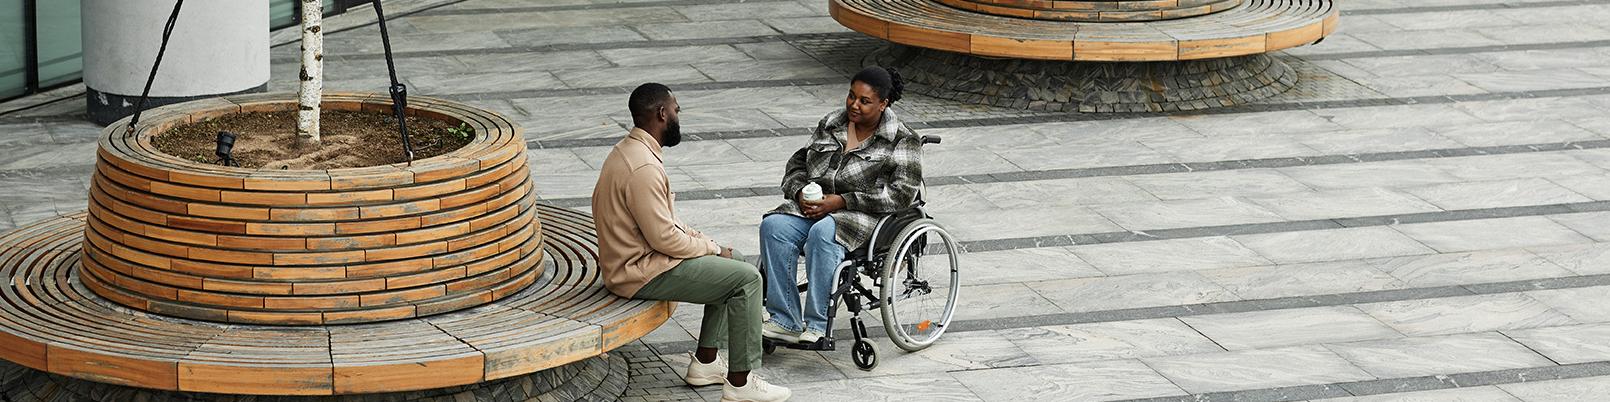 Man and woman talk in city's public space